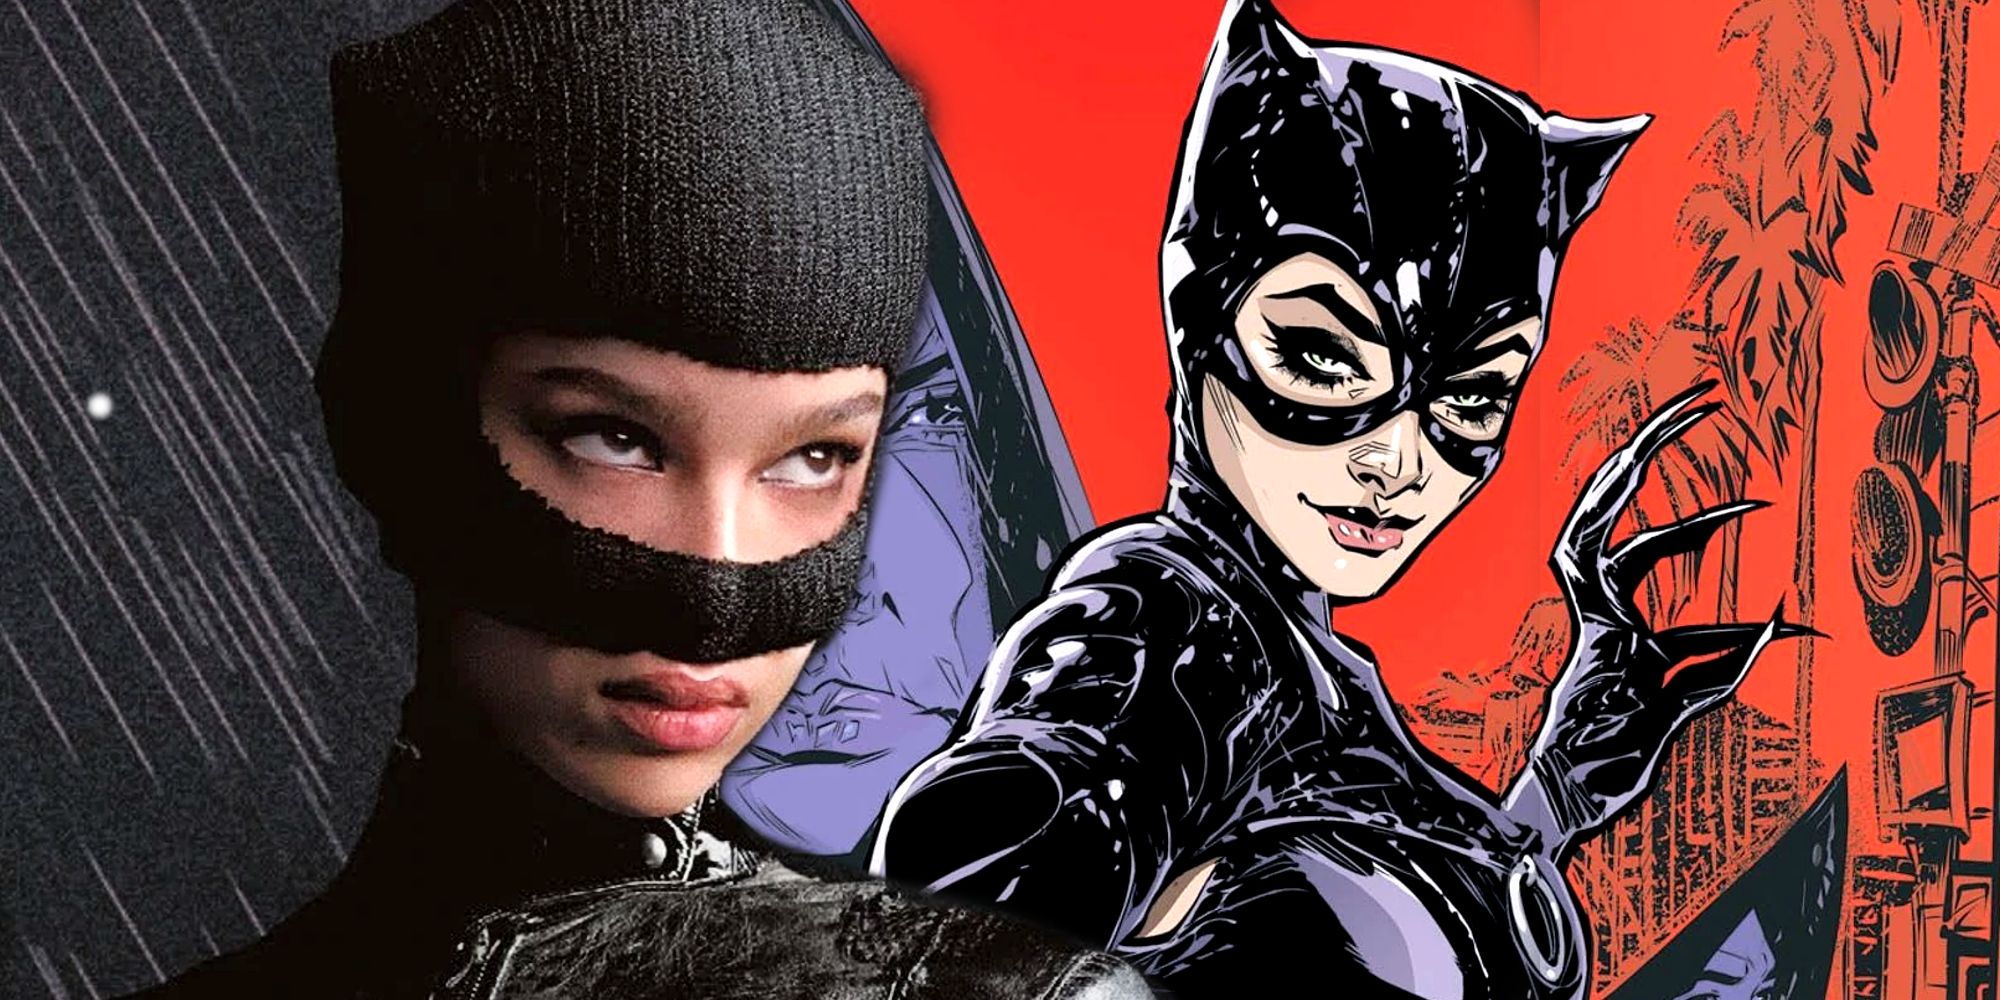 Zoe Kravitz as Catwoman in The Batman and DC Comics